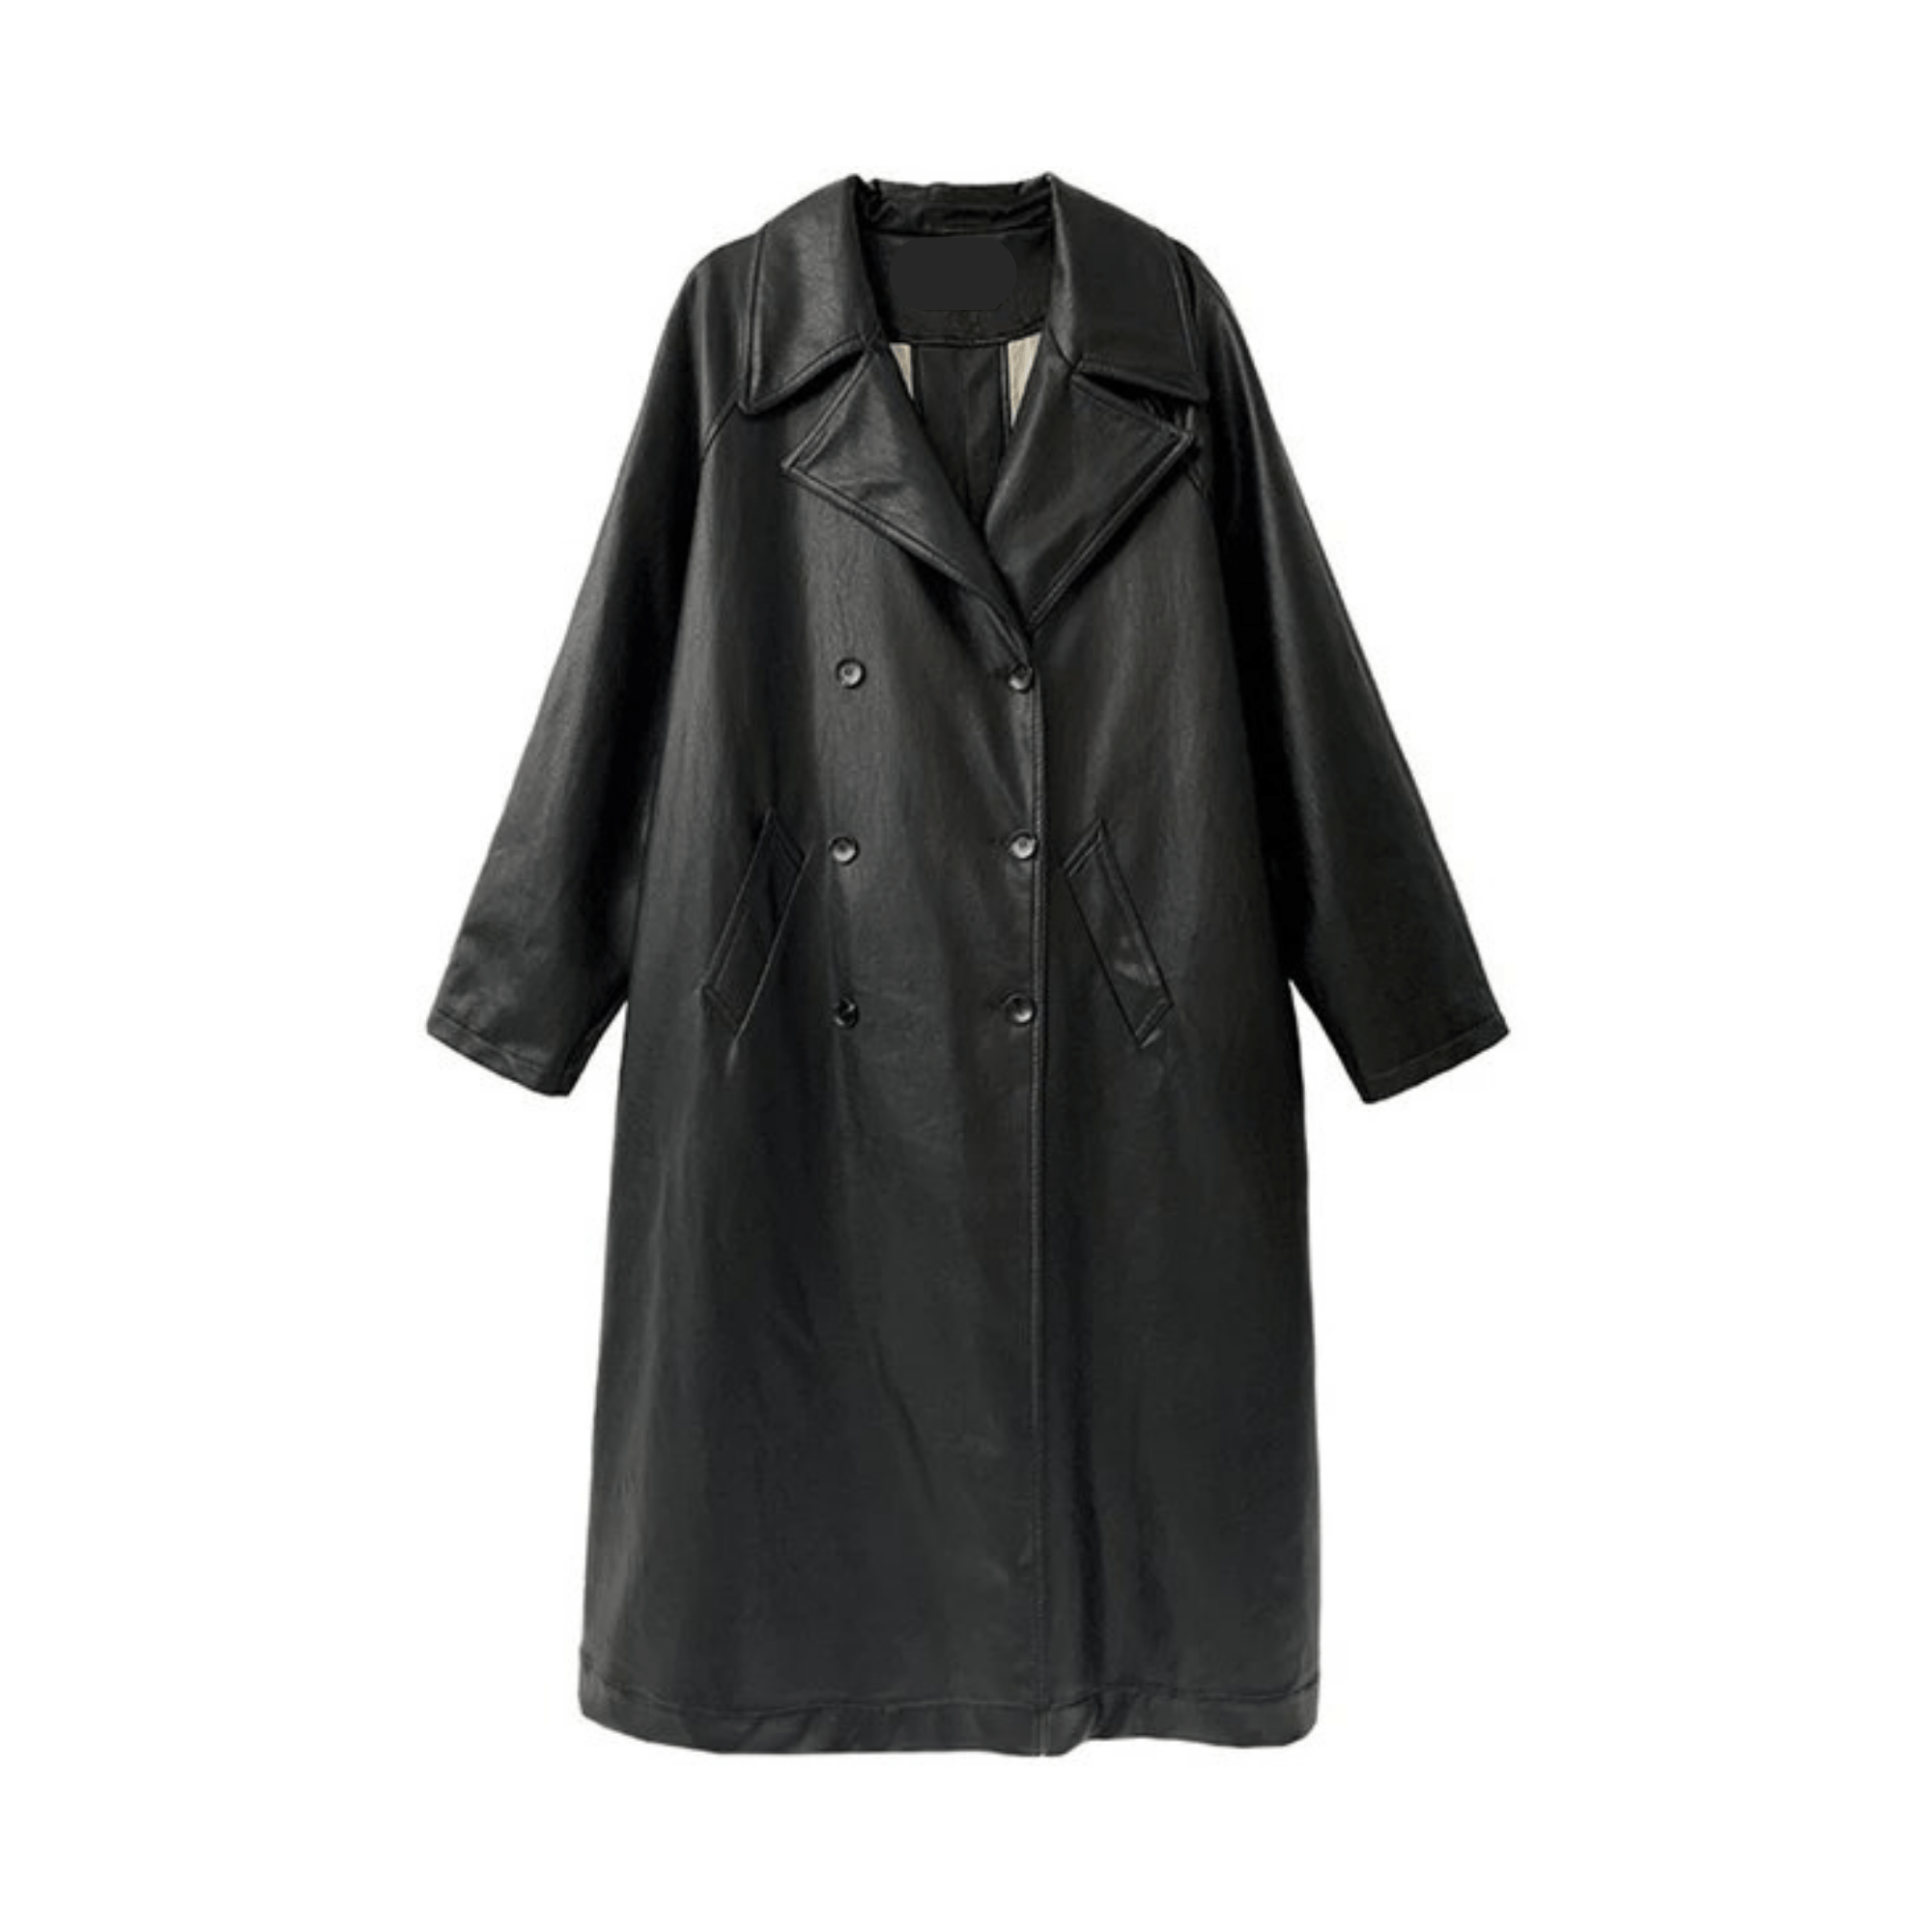 Vegan Leather Double-Breasted Trench Coat - Kelly Obi New York